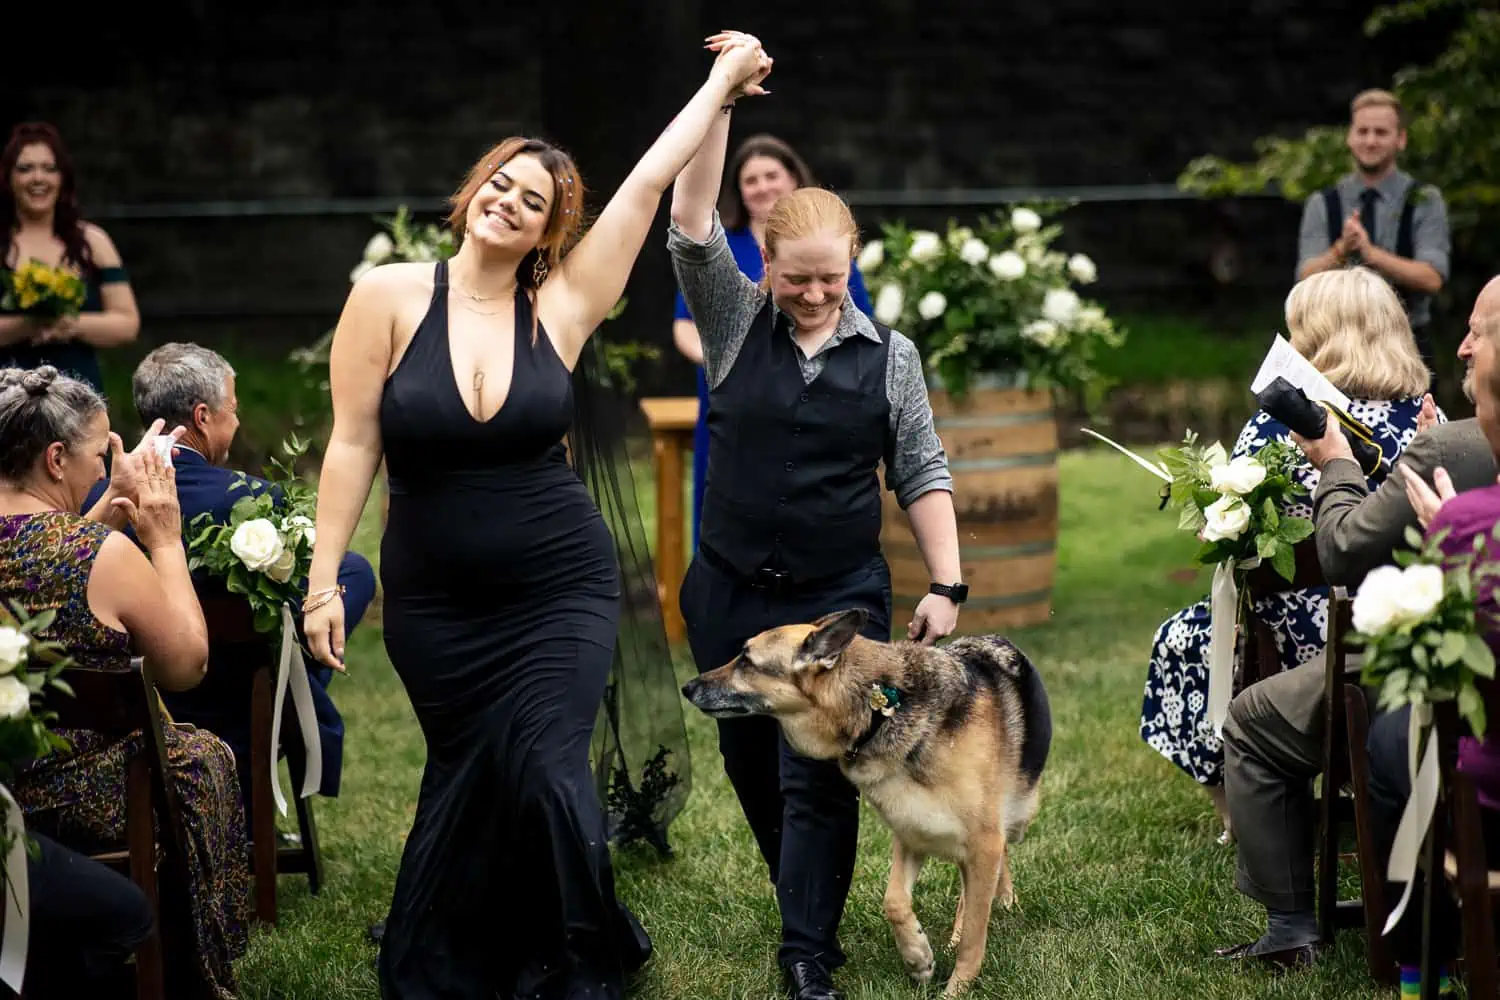 A bride and groom walking down the aisle with a dog.